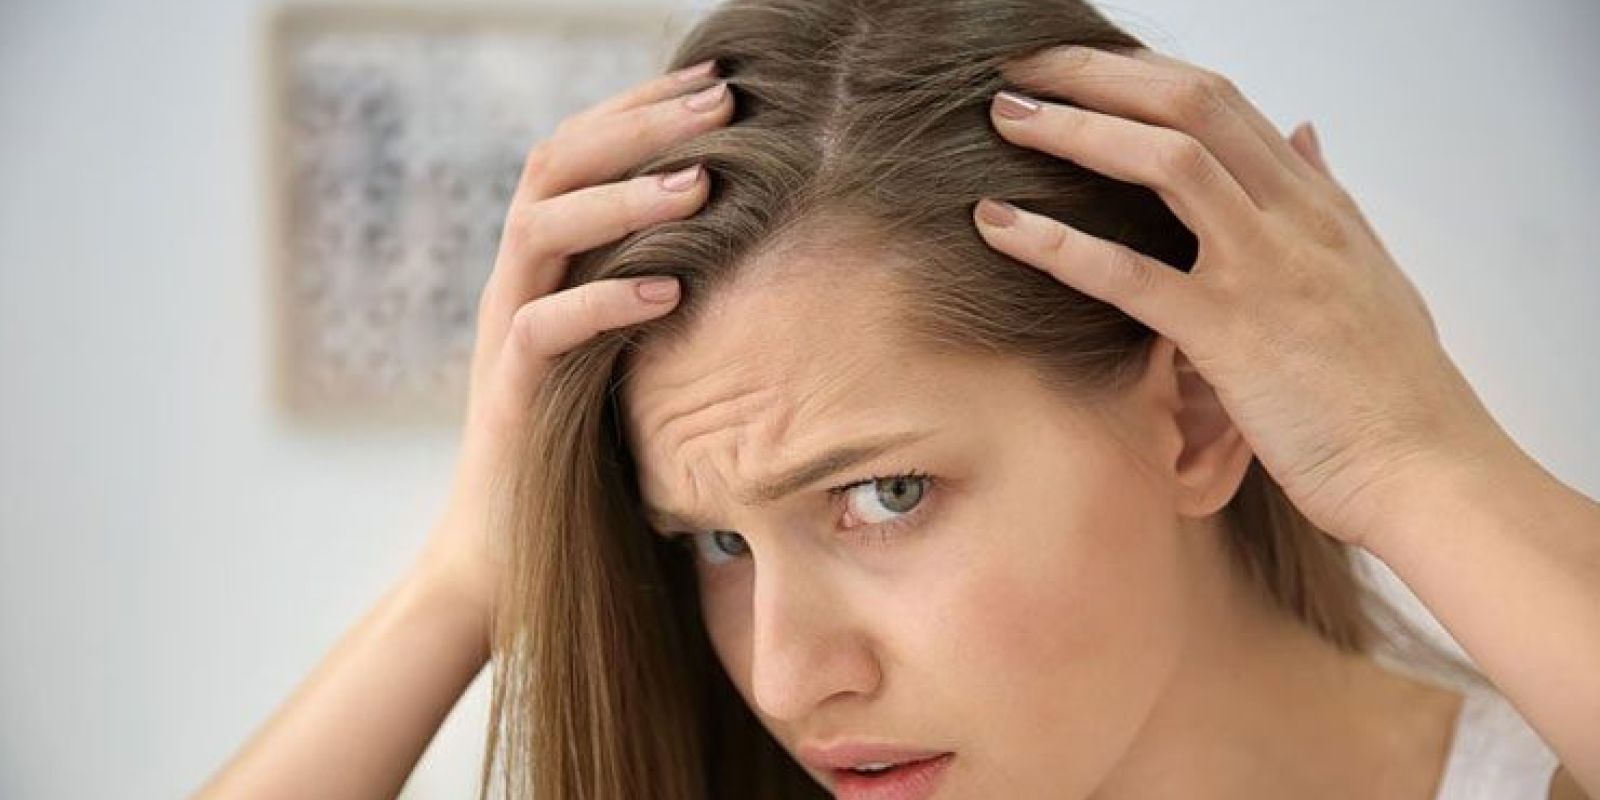 3 Ways To Deal With Hair Fall Post COVID admin ajax.php?action=kernel&p=image&src=%7B%22file%22%3A%22wp content%2Fuploads%2F2022%2F03%2Fpurcorganics 3 Ways To Deal With Hair Fall Post COVID 1